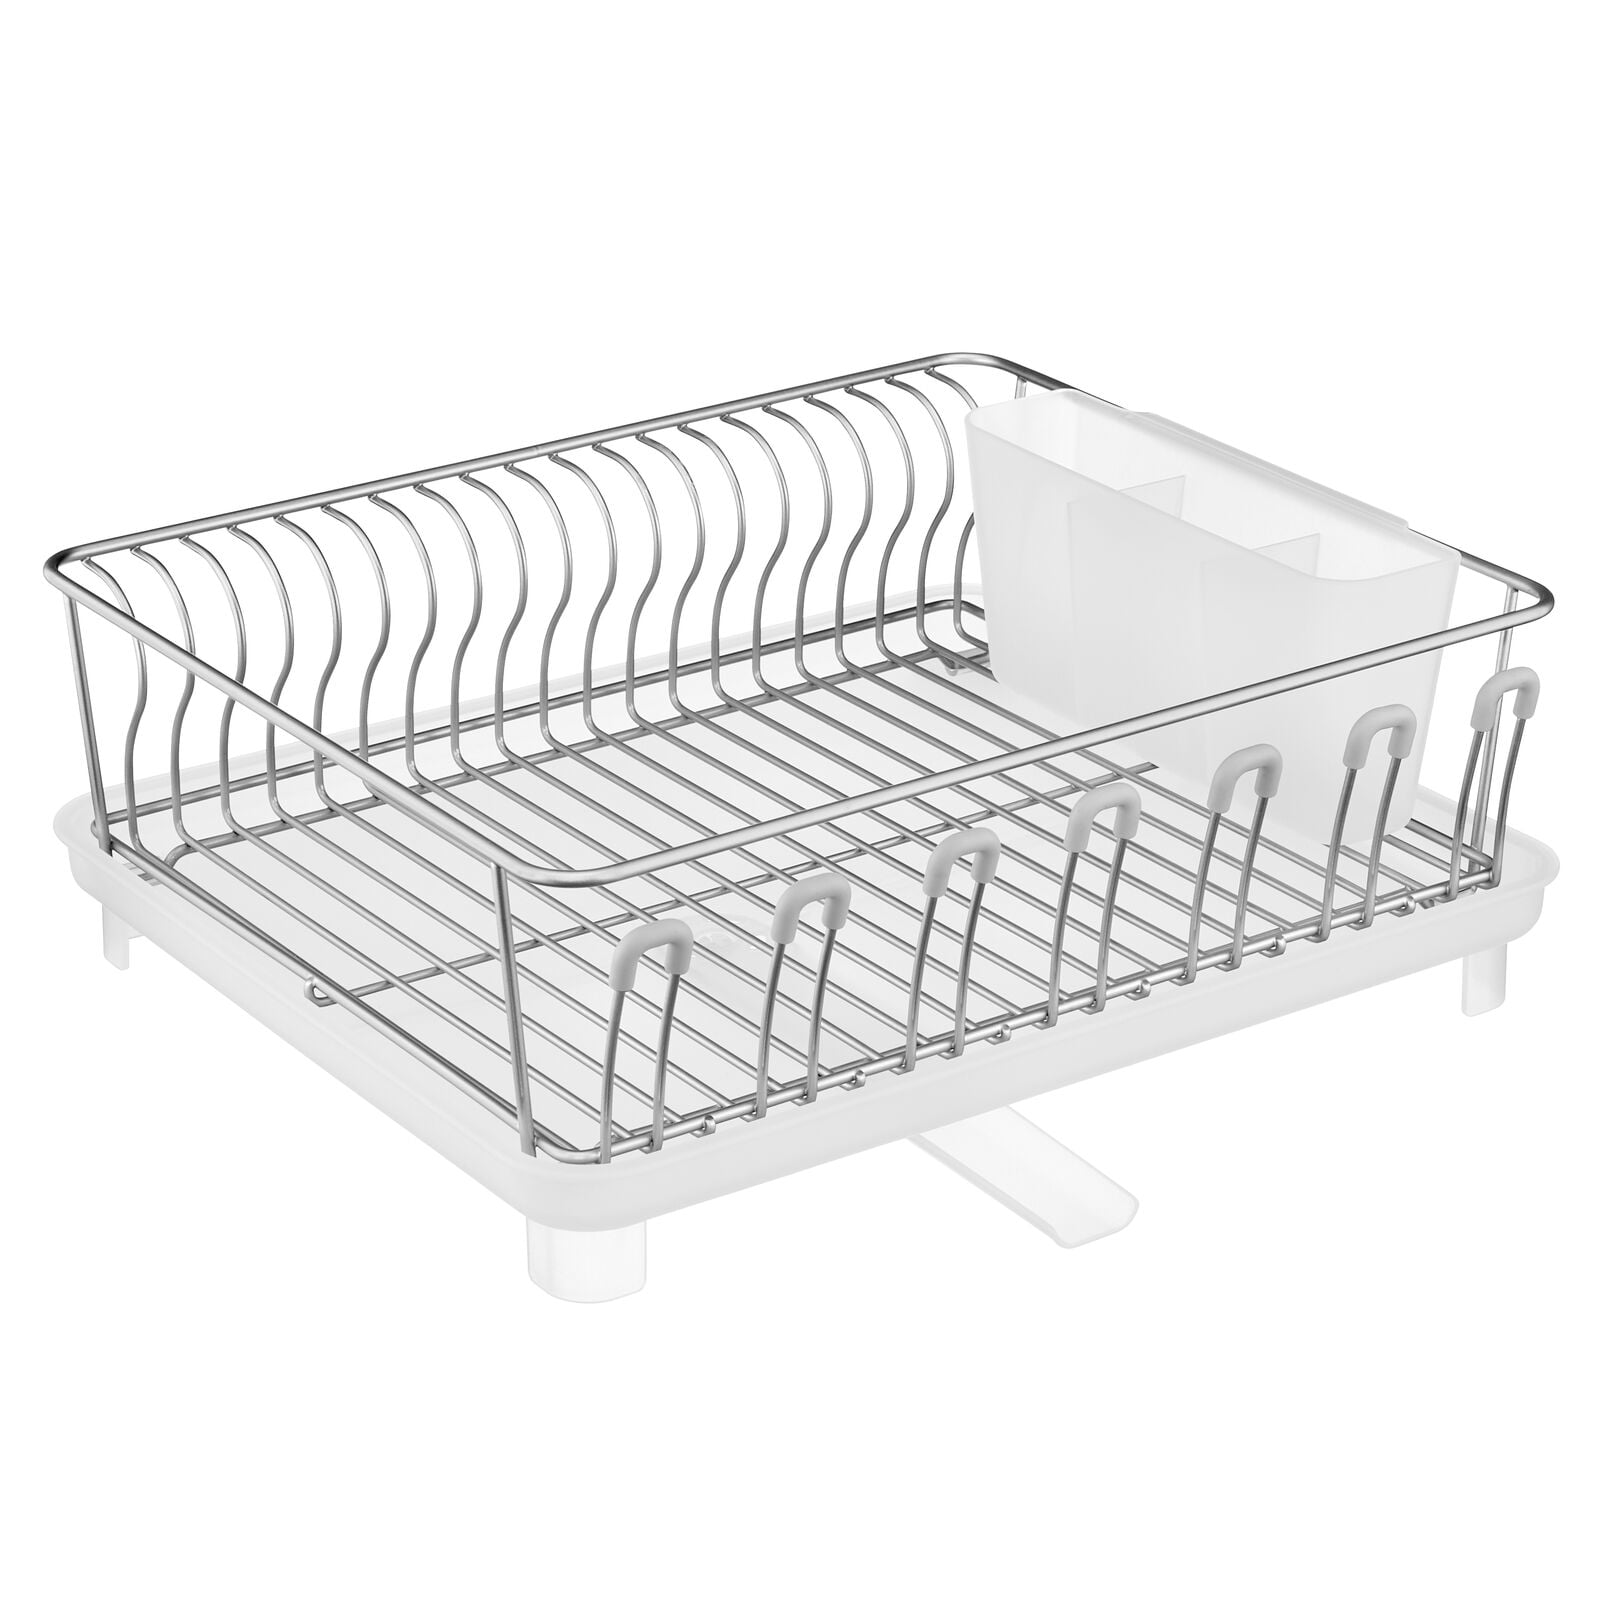 ZOVA PREMIUM STAINLESS Steel Dish Drying Rack with Swivel Spout, Dish  Drainer Ut $67.47 - PicClick